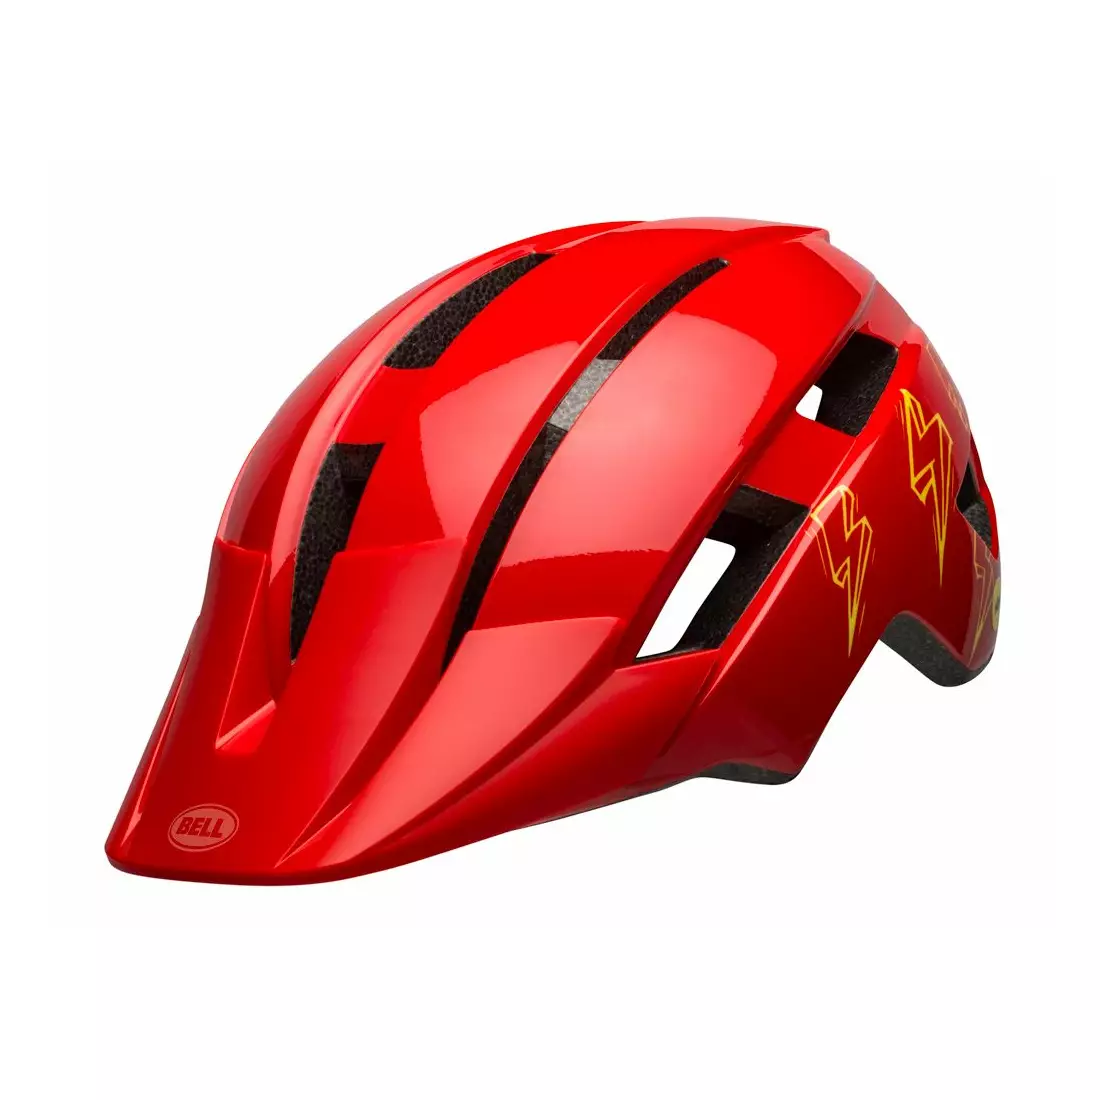 BELL kask rowerowy dziecięcy/juniorski SIDETRACK II INTEGRATED MIPS red bolts BEL-7116431